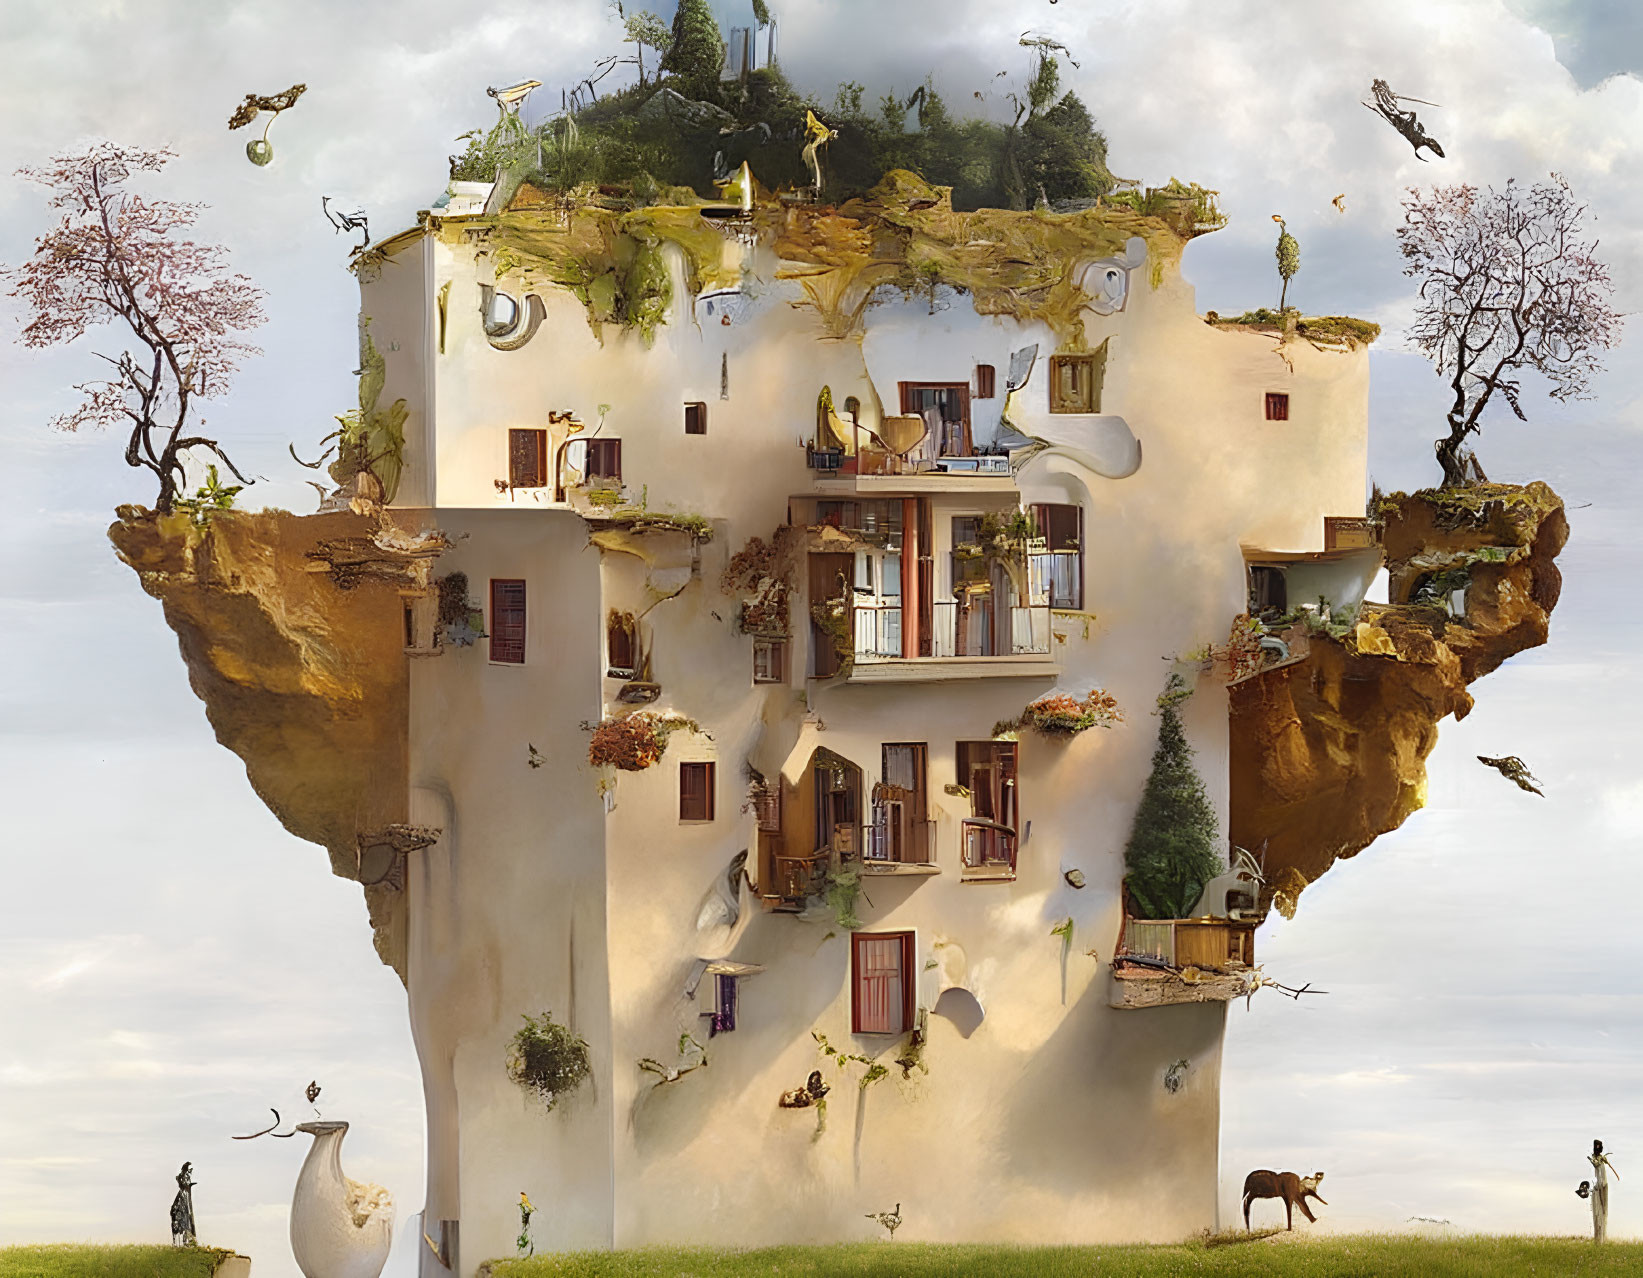 Floating Island with Rock-Embedded Building, Balconies, Trees, and Animals